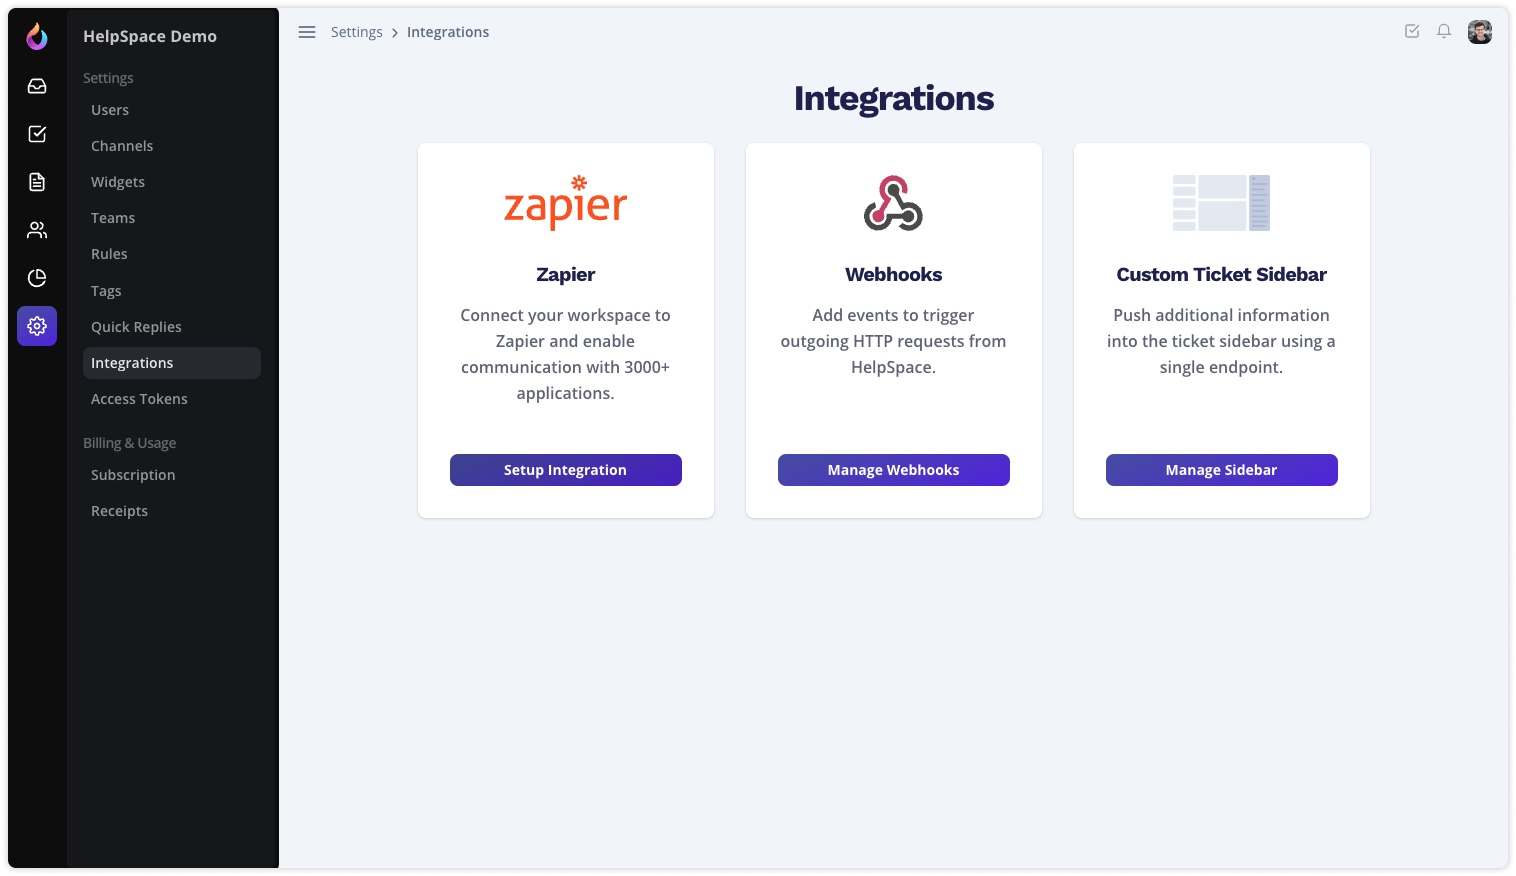 HelpSpace Integrations: various options to integrate HelpSpace into your application landscape, using our API, webhooks or Zapier, to speed up and simplify your processes.